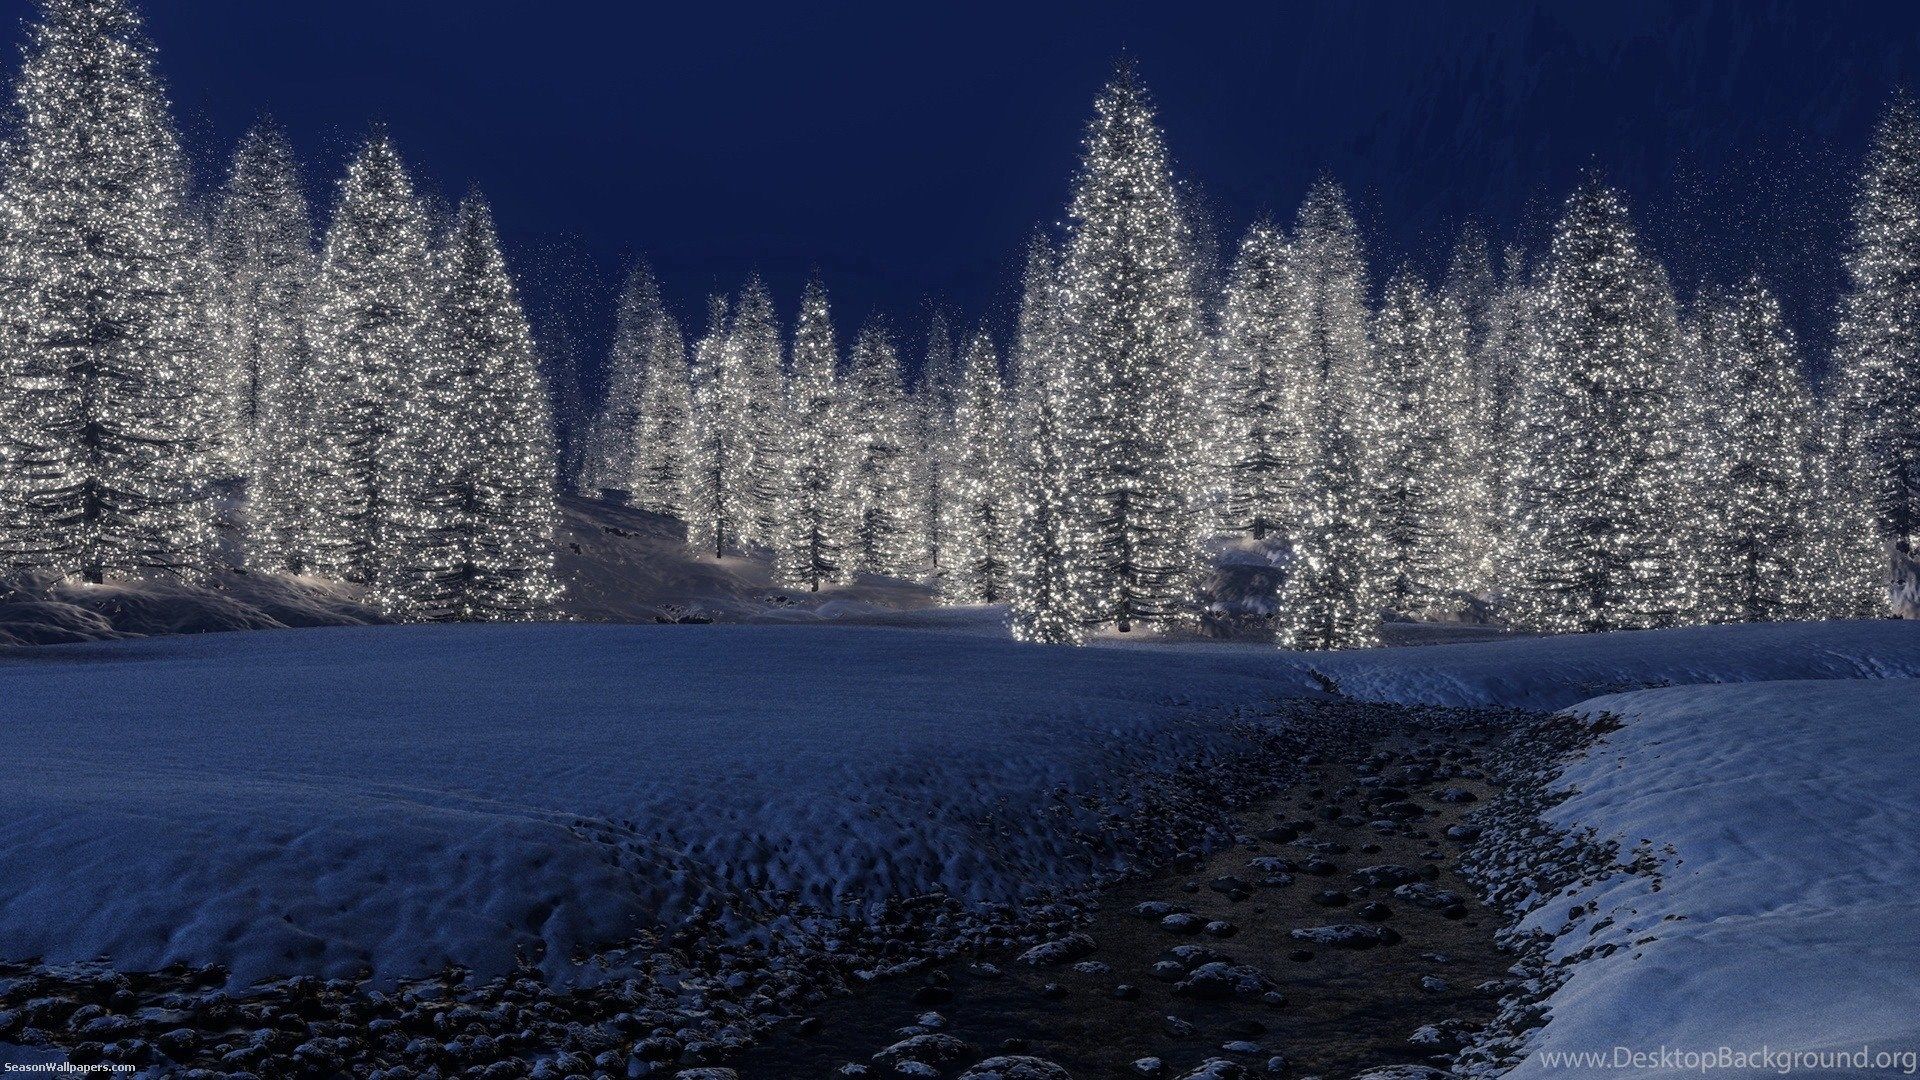 Wallpaper 1920x1080 The Forest Of Glowing Christmas Tree At Night